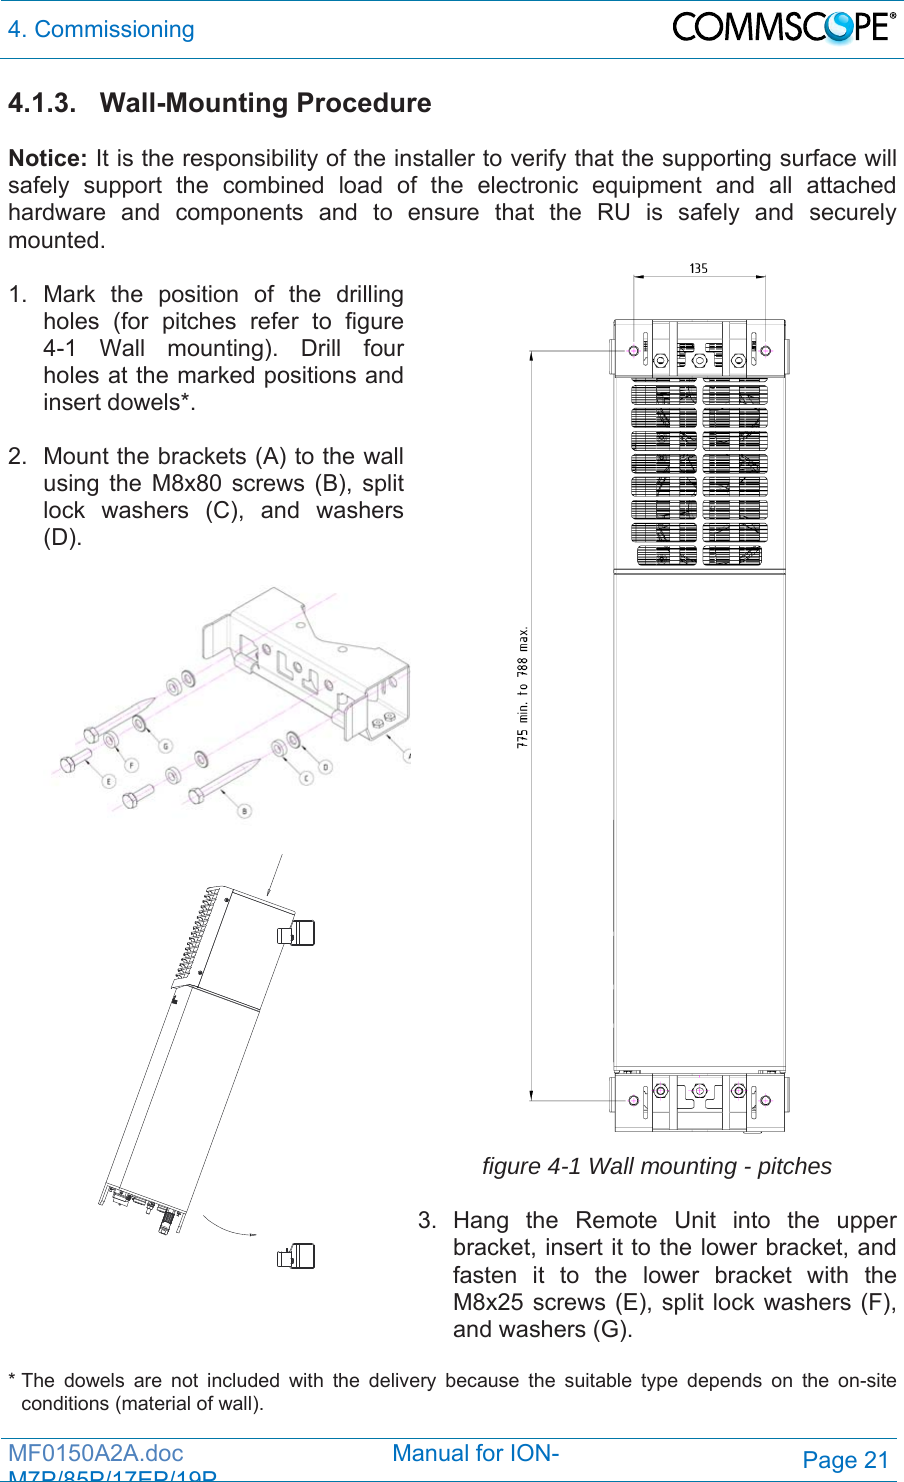 4. Commissioning  MF0150A2A.doc                                Manual for ION-M7P/85P/17EP/19PPage 21 4.1.3. Wall-Mounting Procedure  Notice: It is the responsibility of the installer to verify that the supporting surface will safely support the combined load of the electronic equipment and all attached hardware and components and to ensure that the RU is safely and securely mounted.  1. Mark the position of the drilling holes (for pitches refer to figure 4-1 Wall mounting). Drill four holes at the marked positions and insert dowels*.  2.  Mount the brackets (A) to the wall using the M8x80 screws (B), split lock washers (C), and washers (D).      figure 4-1 Wall mounting - pitches  3. Hang the Remote Unit into the upper bracket, insert it to the lower bracket, and fasten it to the lower bracket with the M8x25 screws (E), split lock washers (F), and washers (G).  * The dowels are not included with the delivery because the suitable type depends on the on-site conditions (material of wall). 